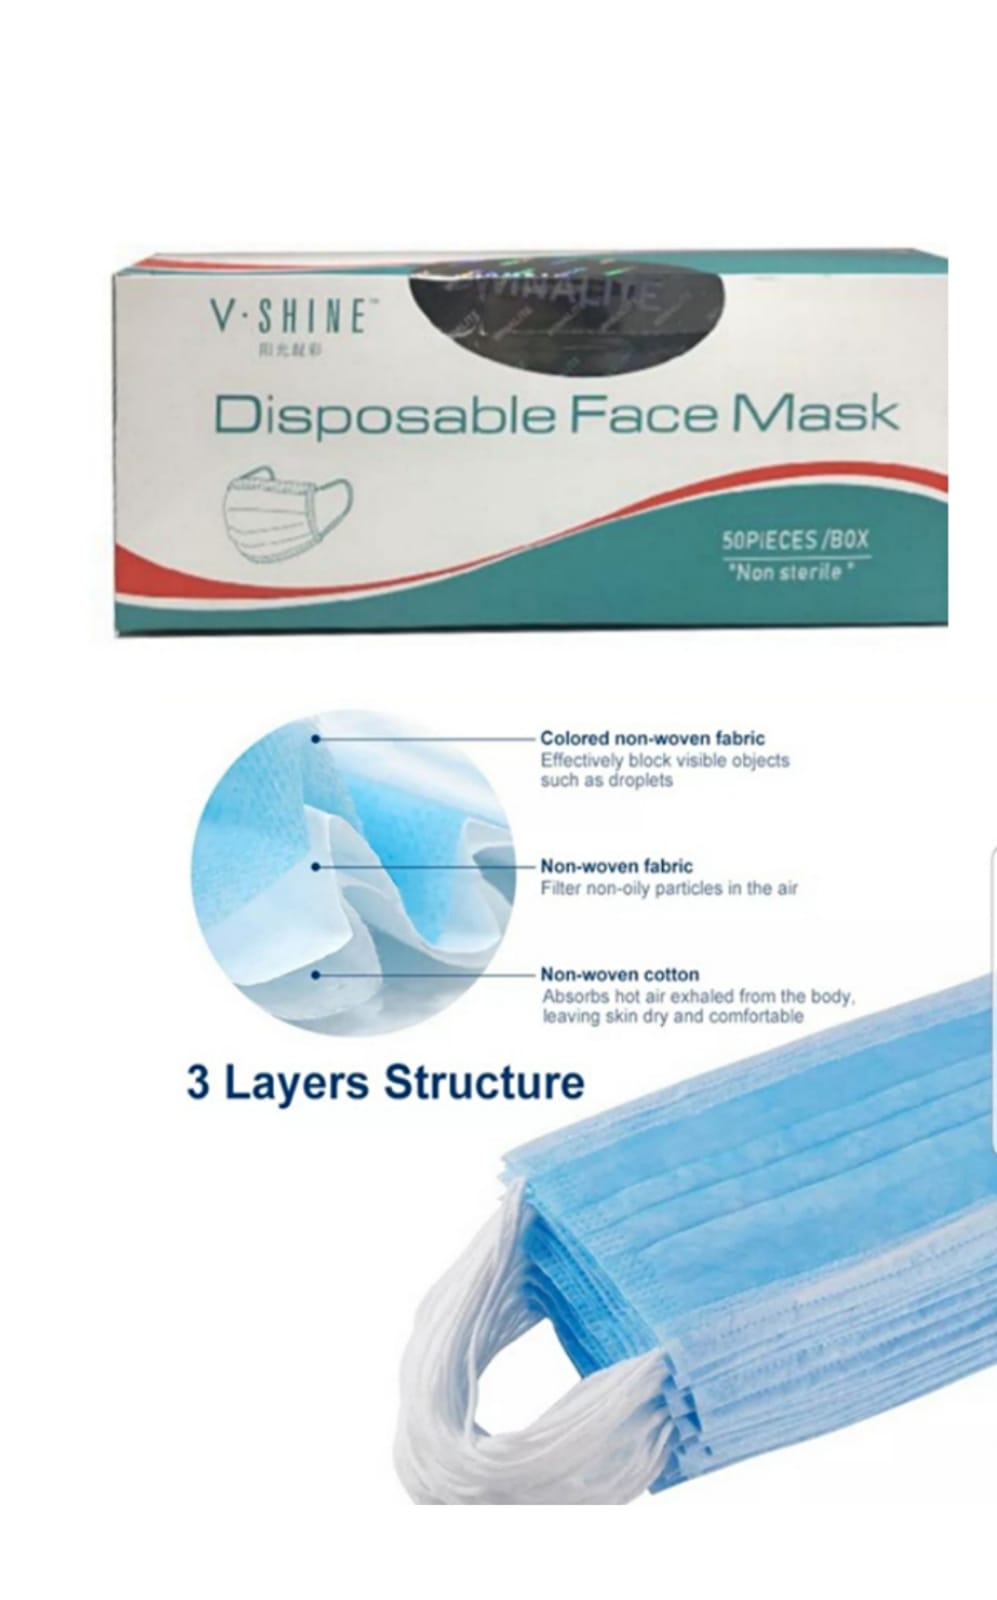 Type IIR Disposable Face Mask 50pcs Box ~ 3 layers Blue colour.